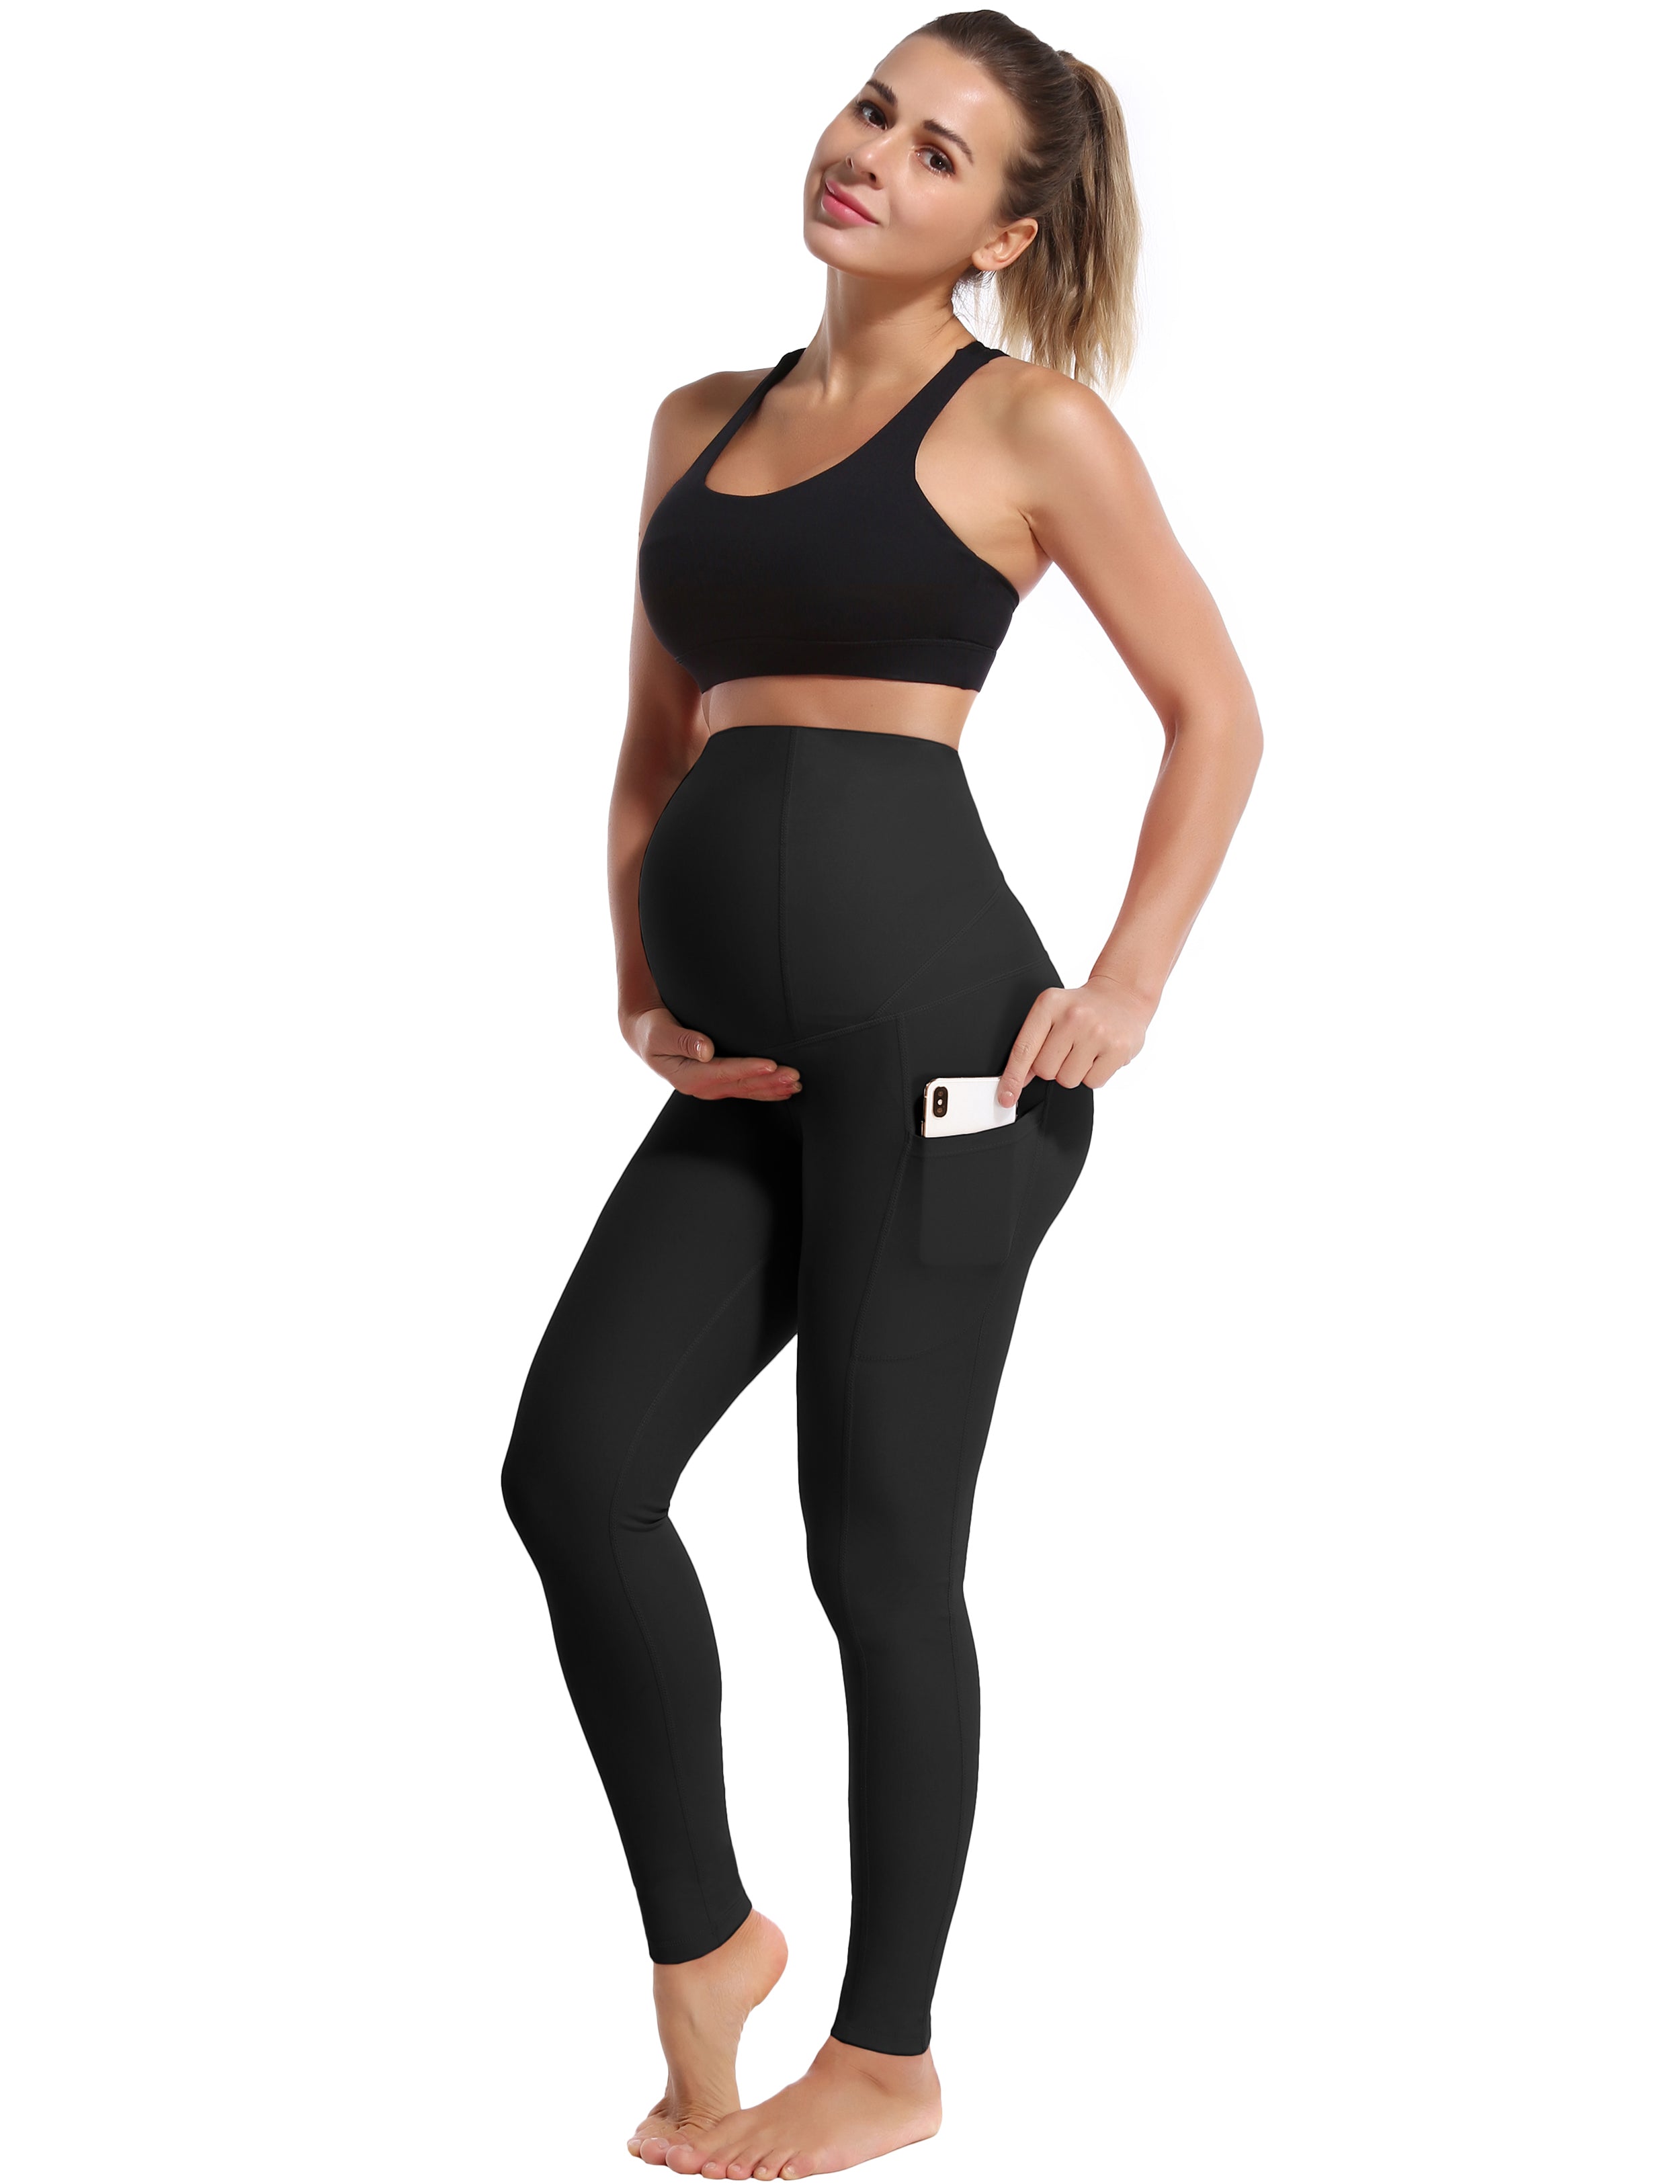 26" Side Pockets Maternity Biking Pants black 87%Nylon/13%Spandex Softest-ever fabric High elasticity 4-way stretch Fabric doesn't attract lint easily No see-through Moisture-wicking Machine wash